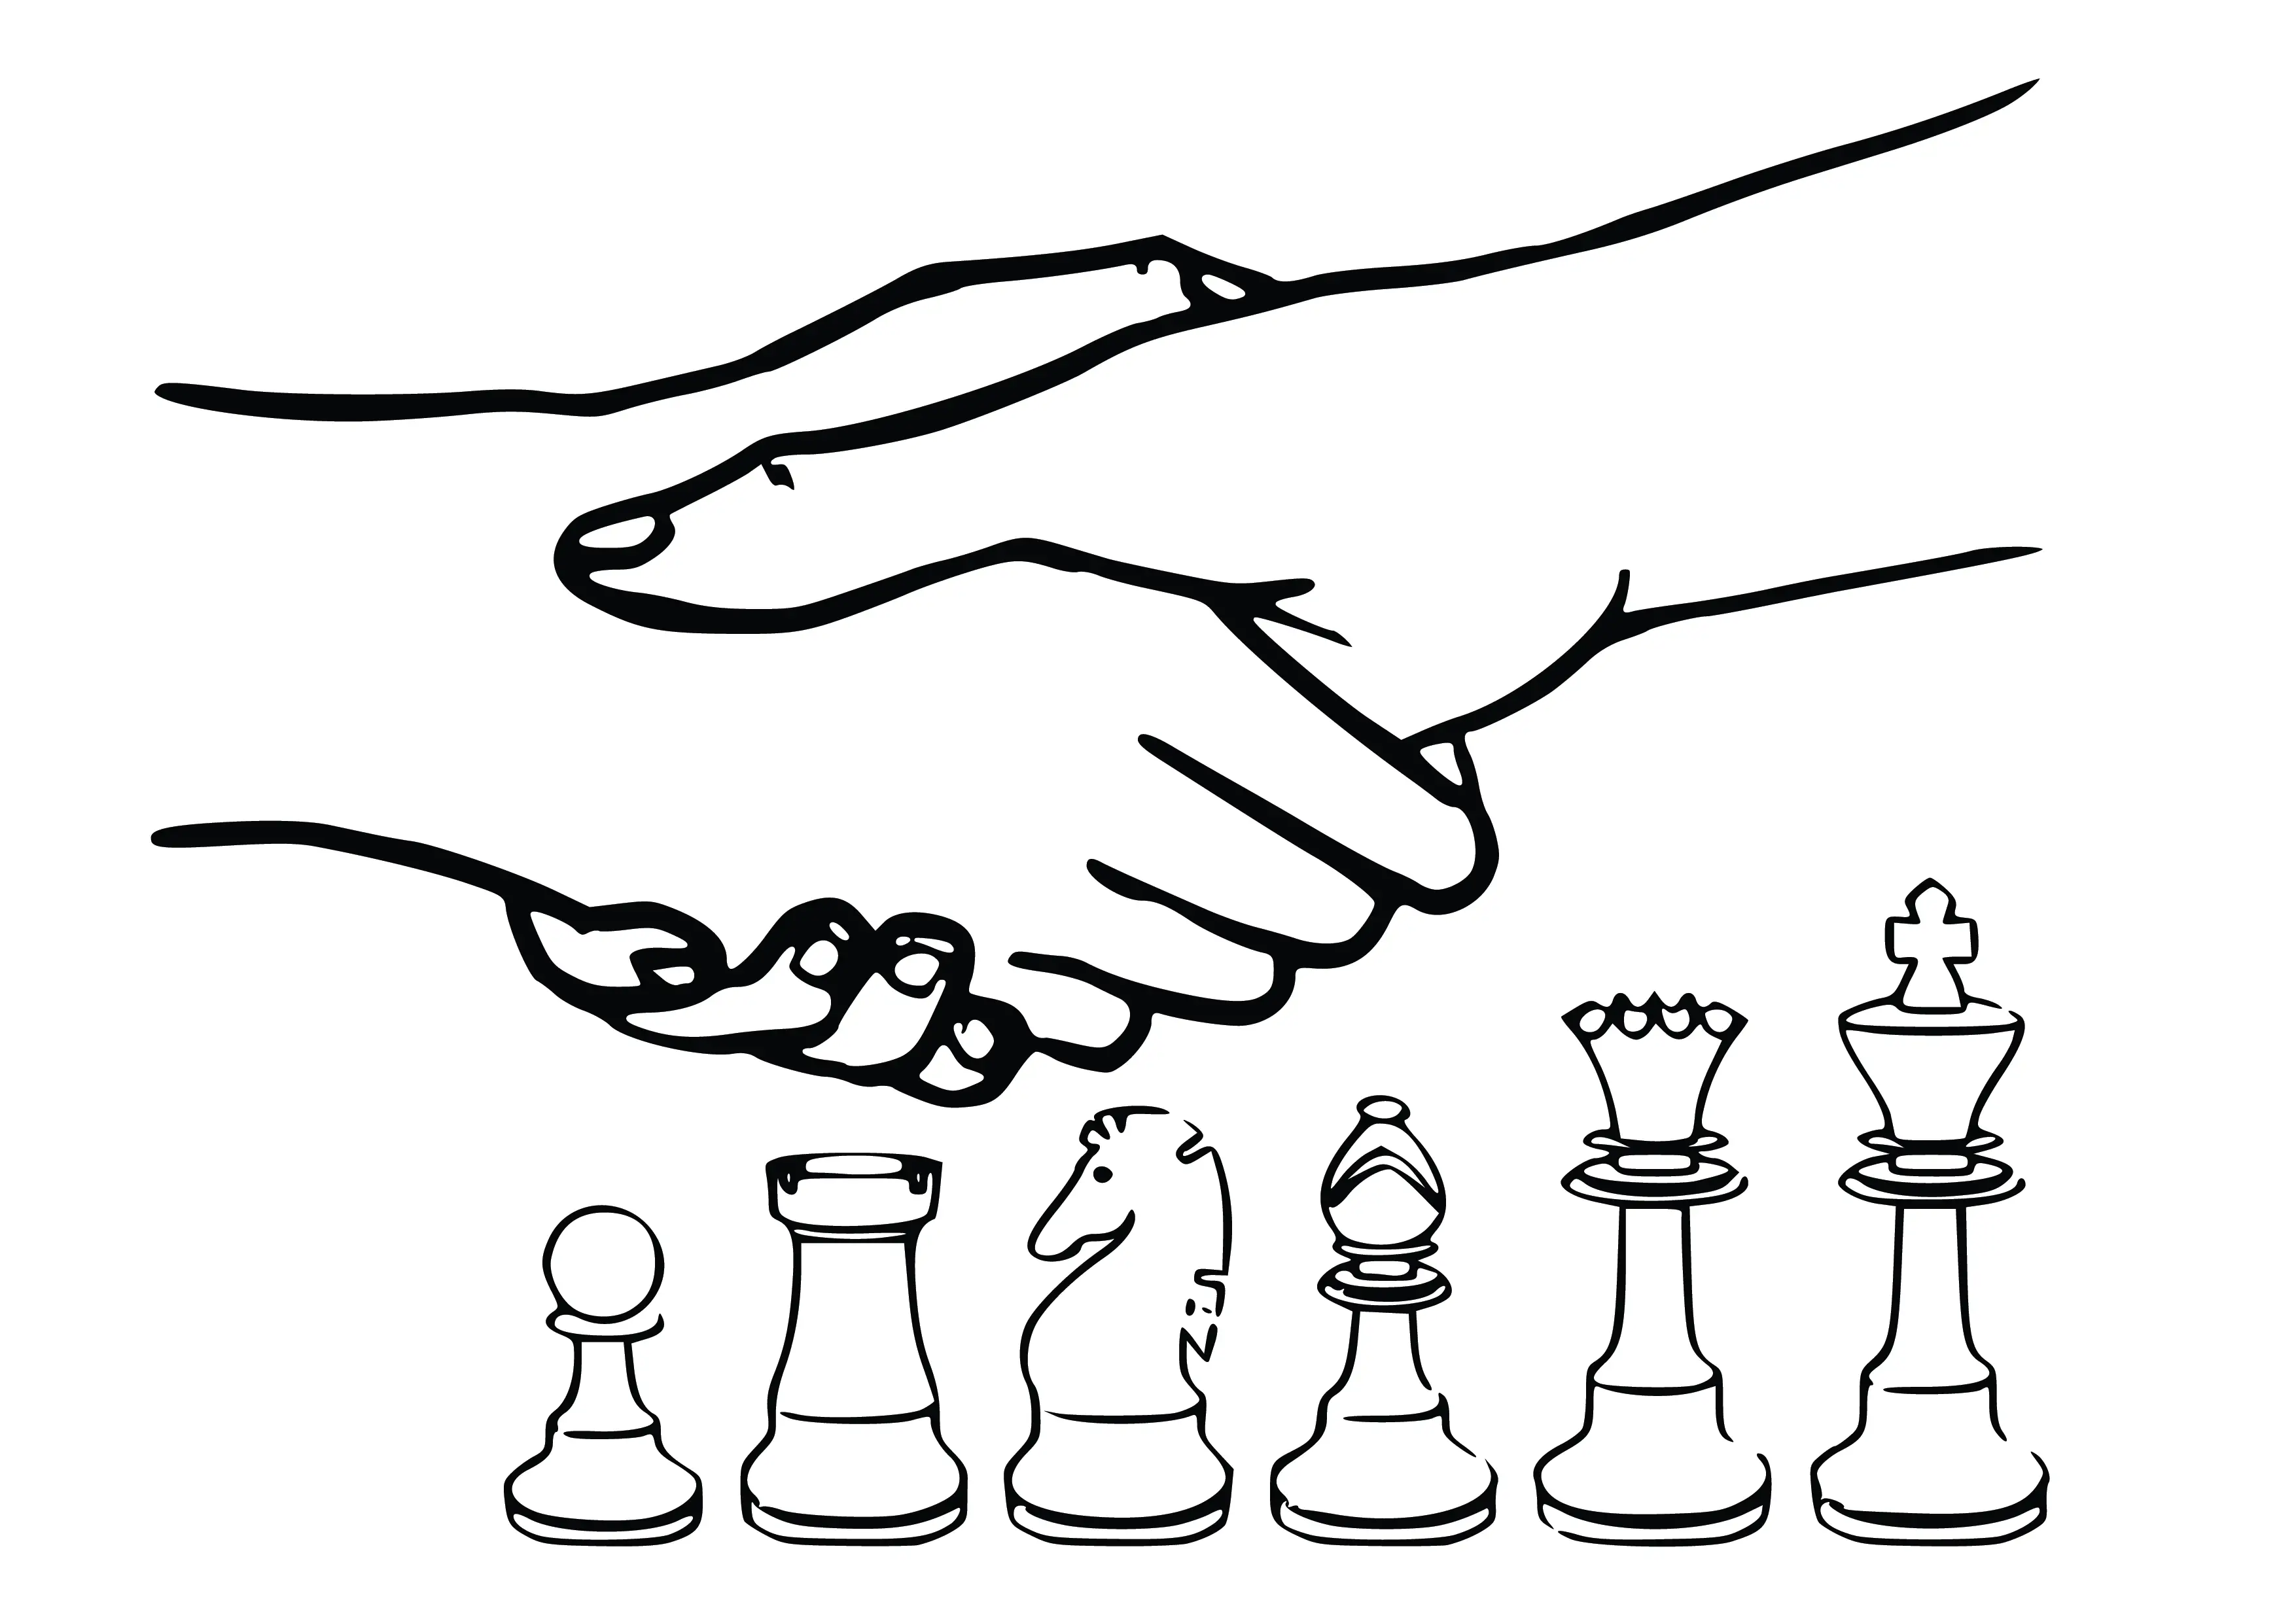 CHESS HANDSHAKE-Game-SIMPLE-EASY-line-drawings-coloring-page-for-kids